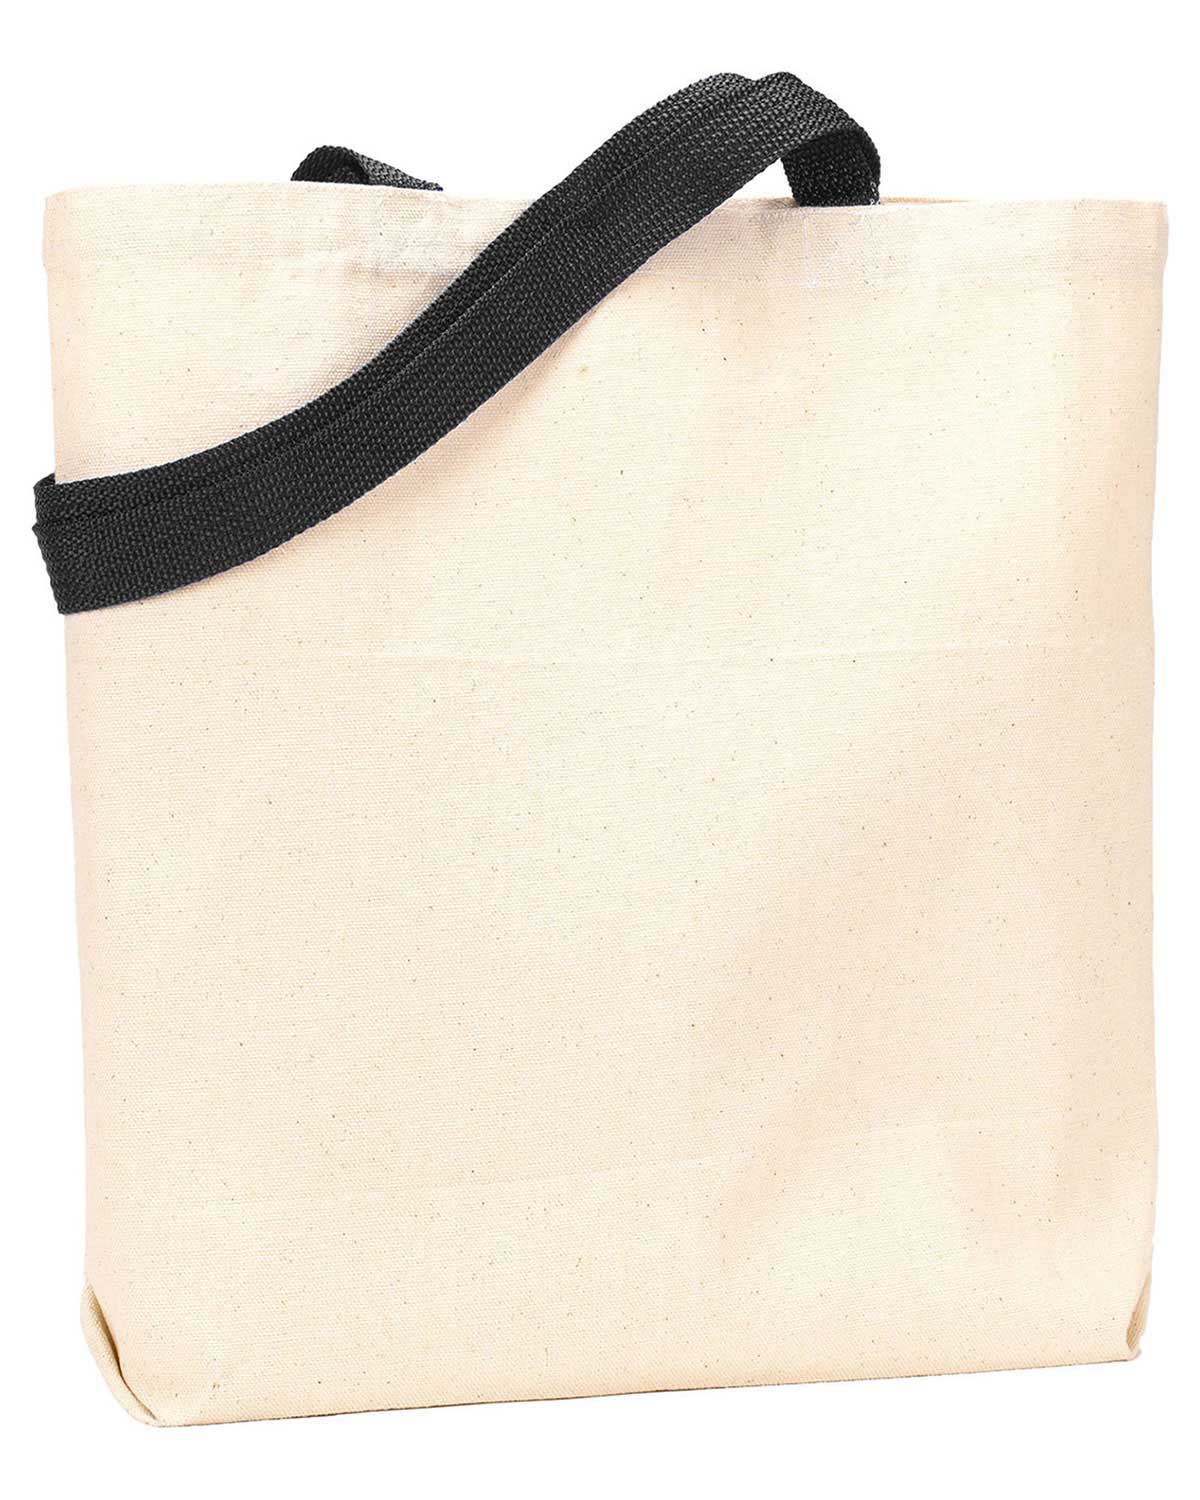 UltraClub 9868 Unisex Organic Recycled Cotton Canvas Tote with Contrast Handles at Apparelstation